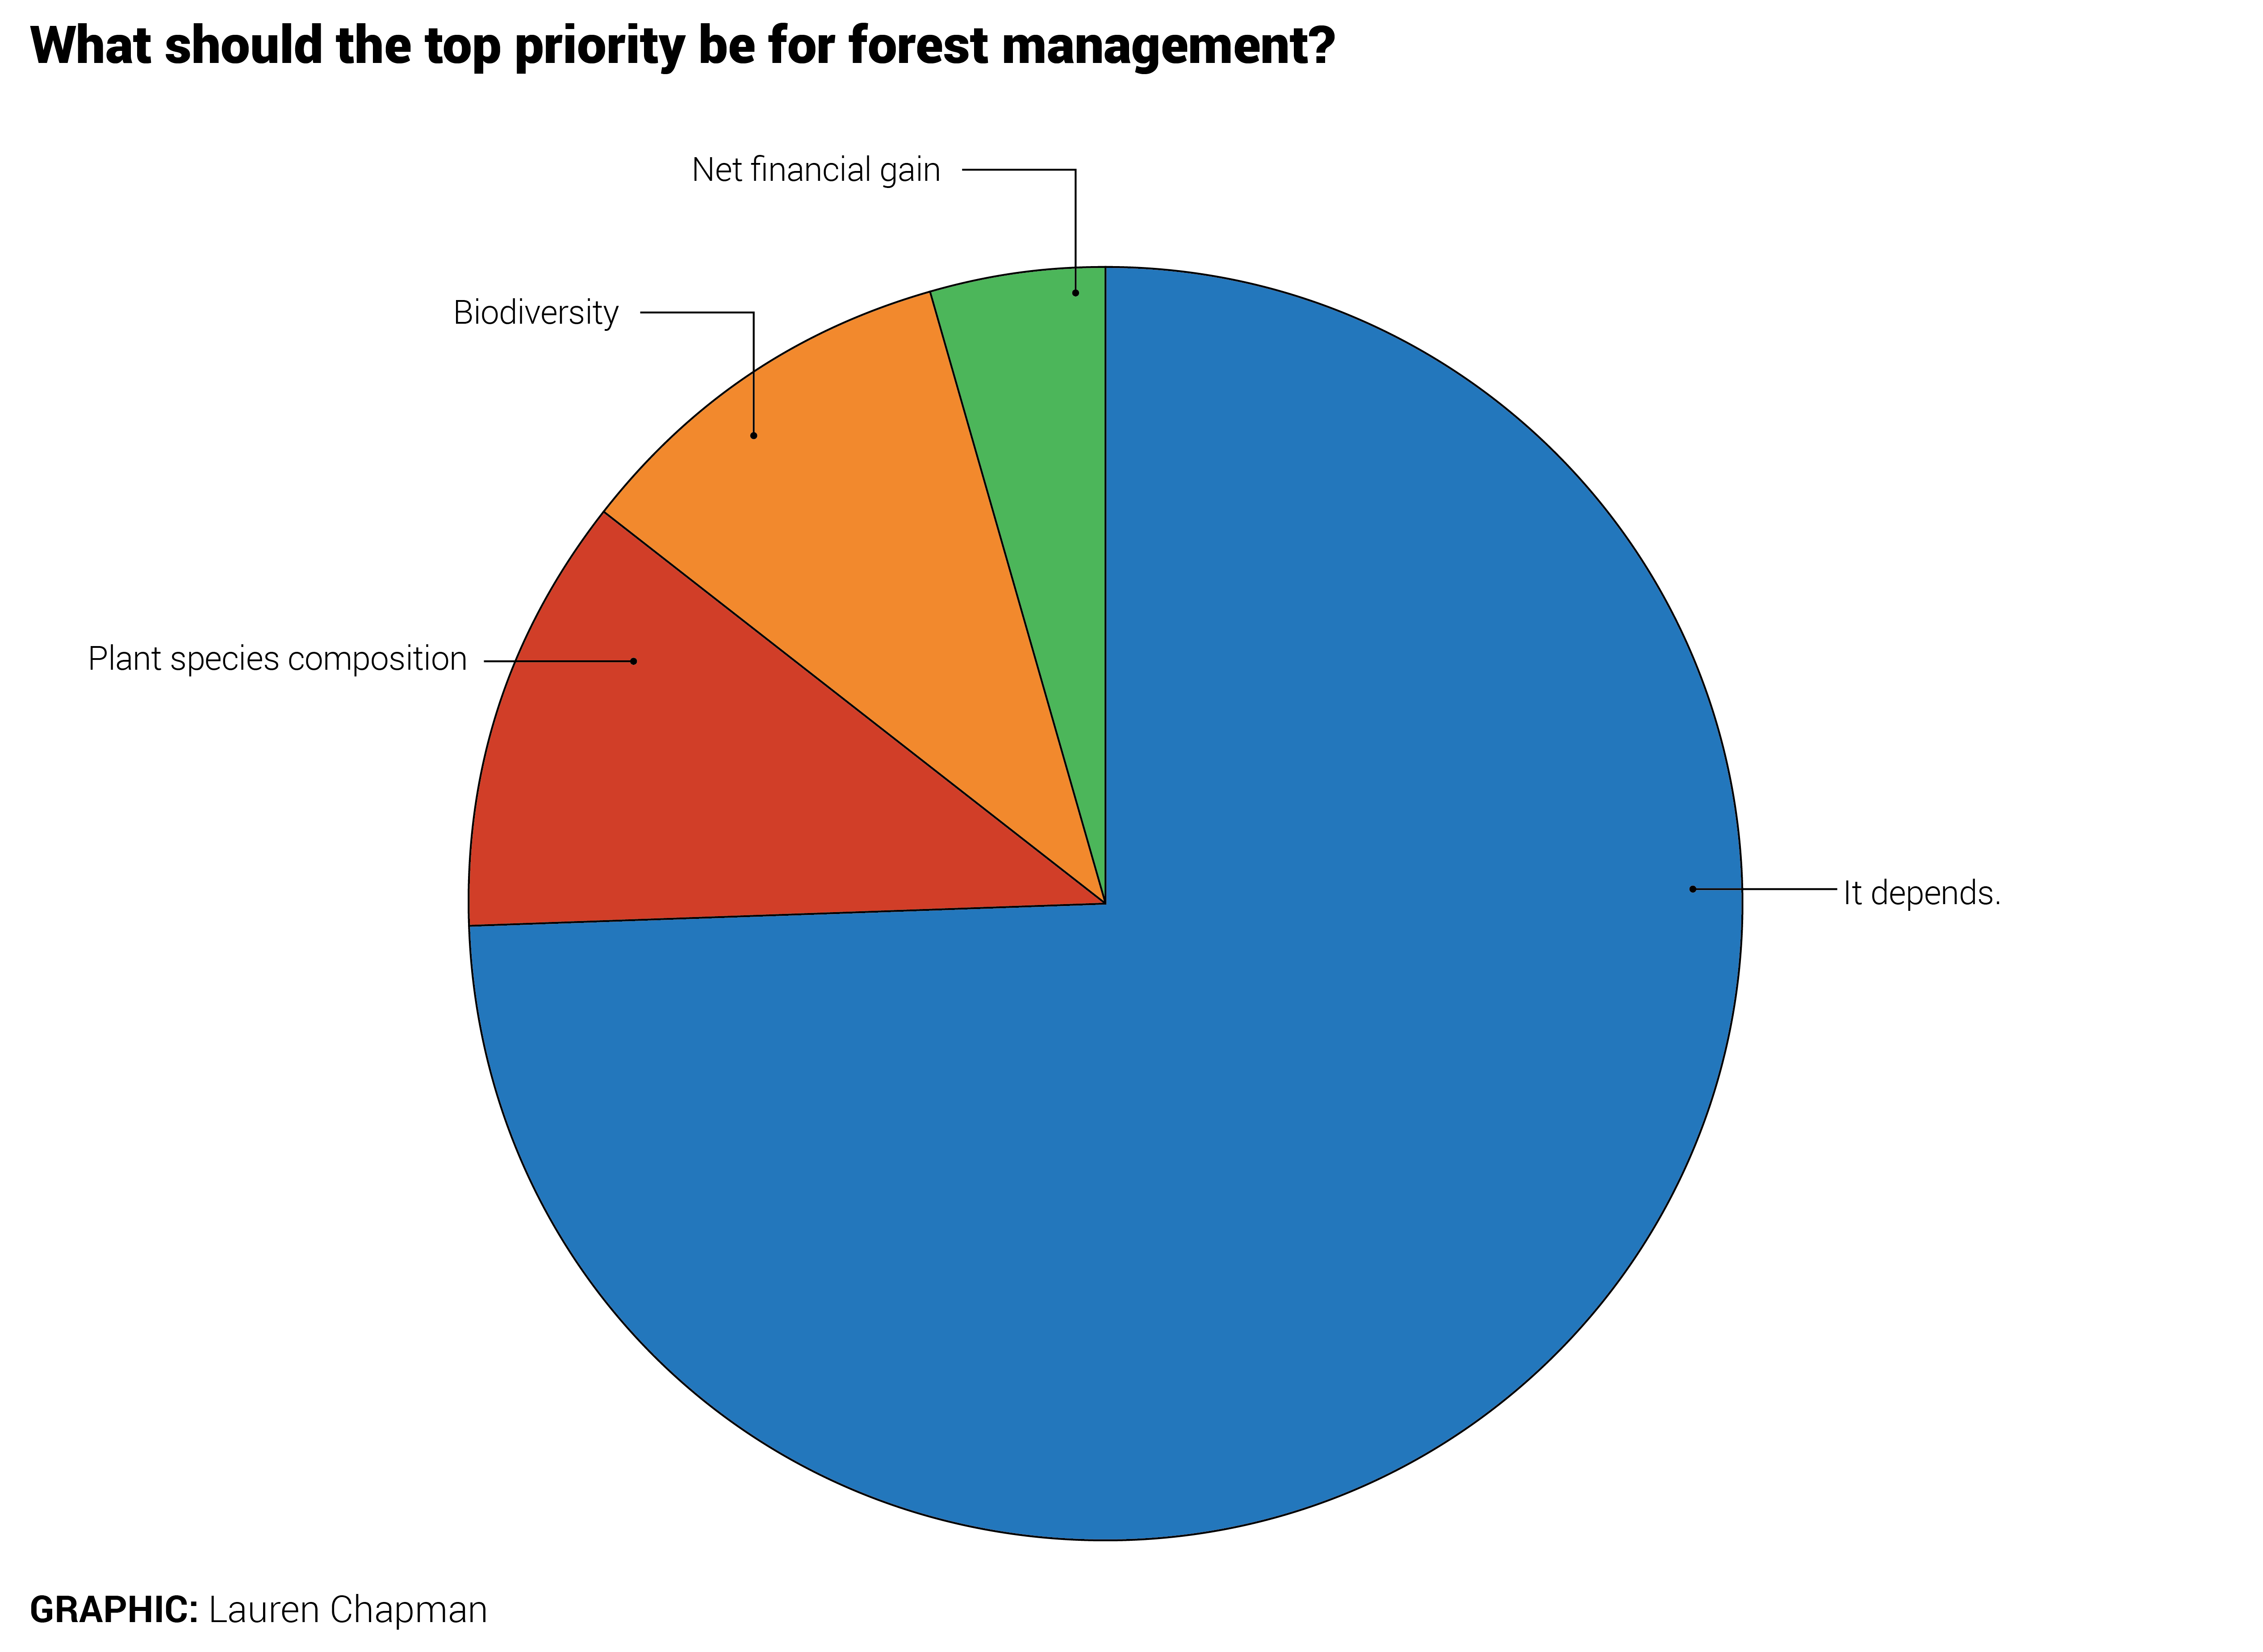 What should the top priority be for forest management? 75.3 percent of respondents
    said it depends. 10.8 percent said plant species composition. 9.7 percent said biodiversity. And 4.3 percent said net financial gain.